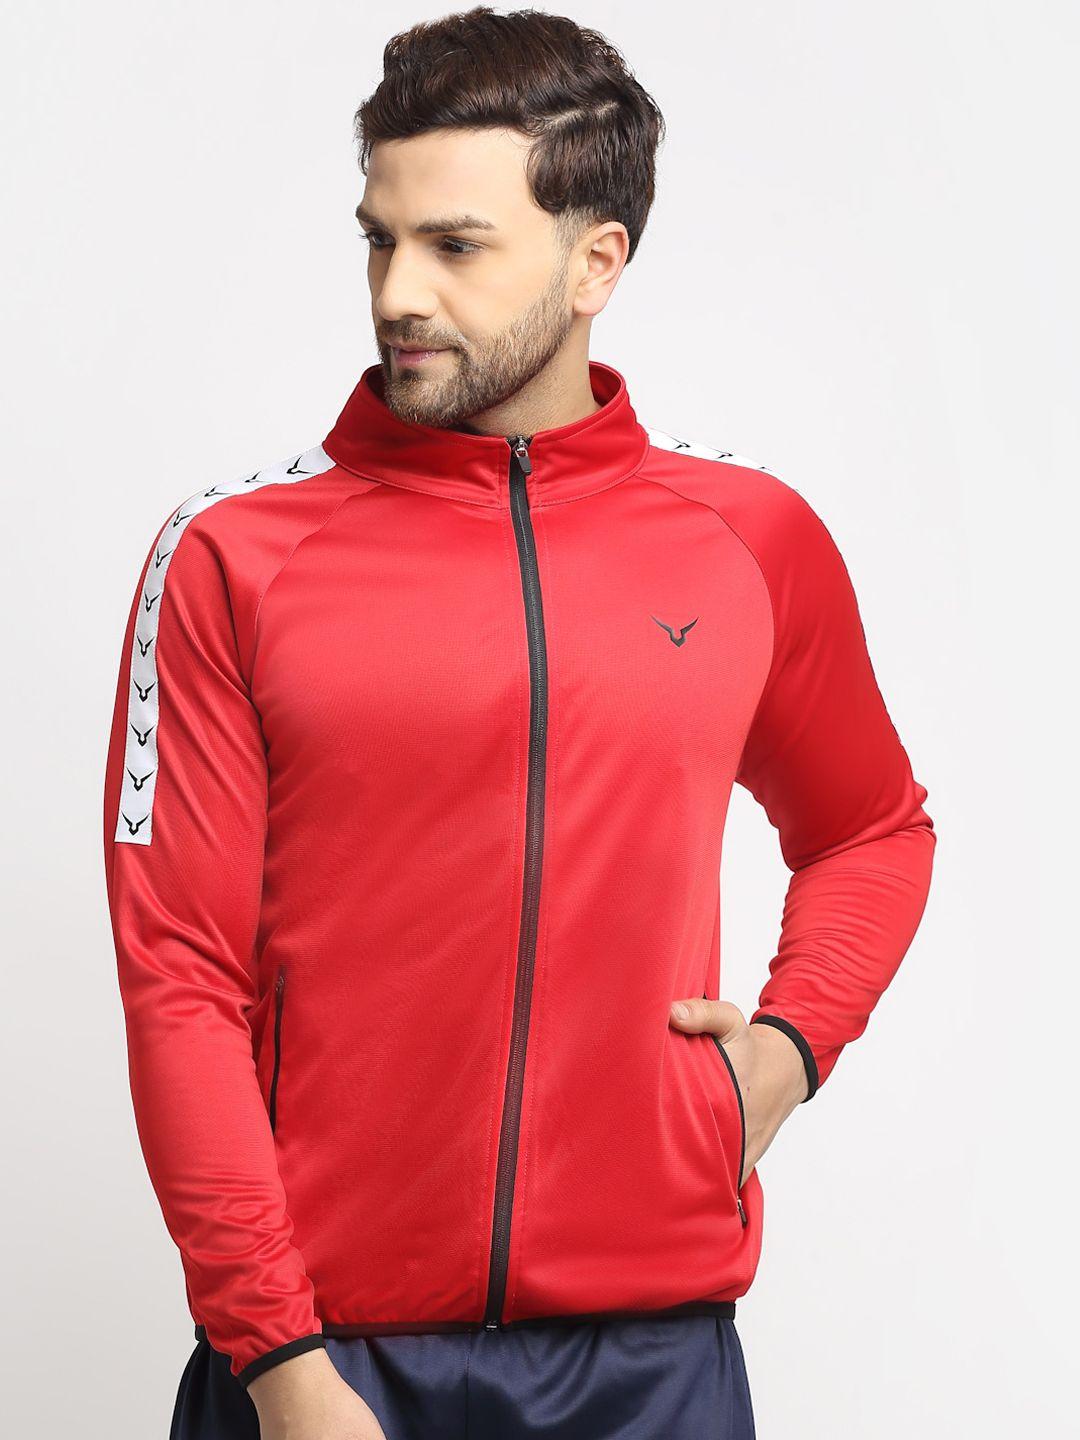 invincible men red lightweight rapid dry training or gym sporty jacket